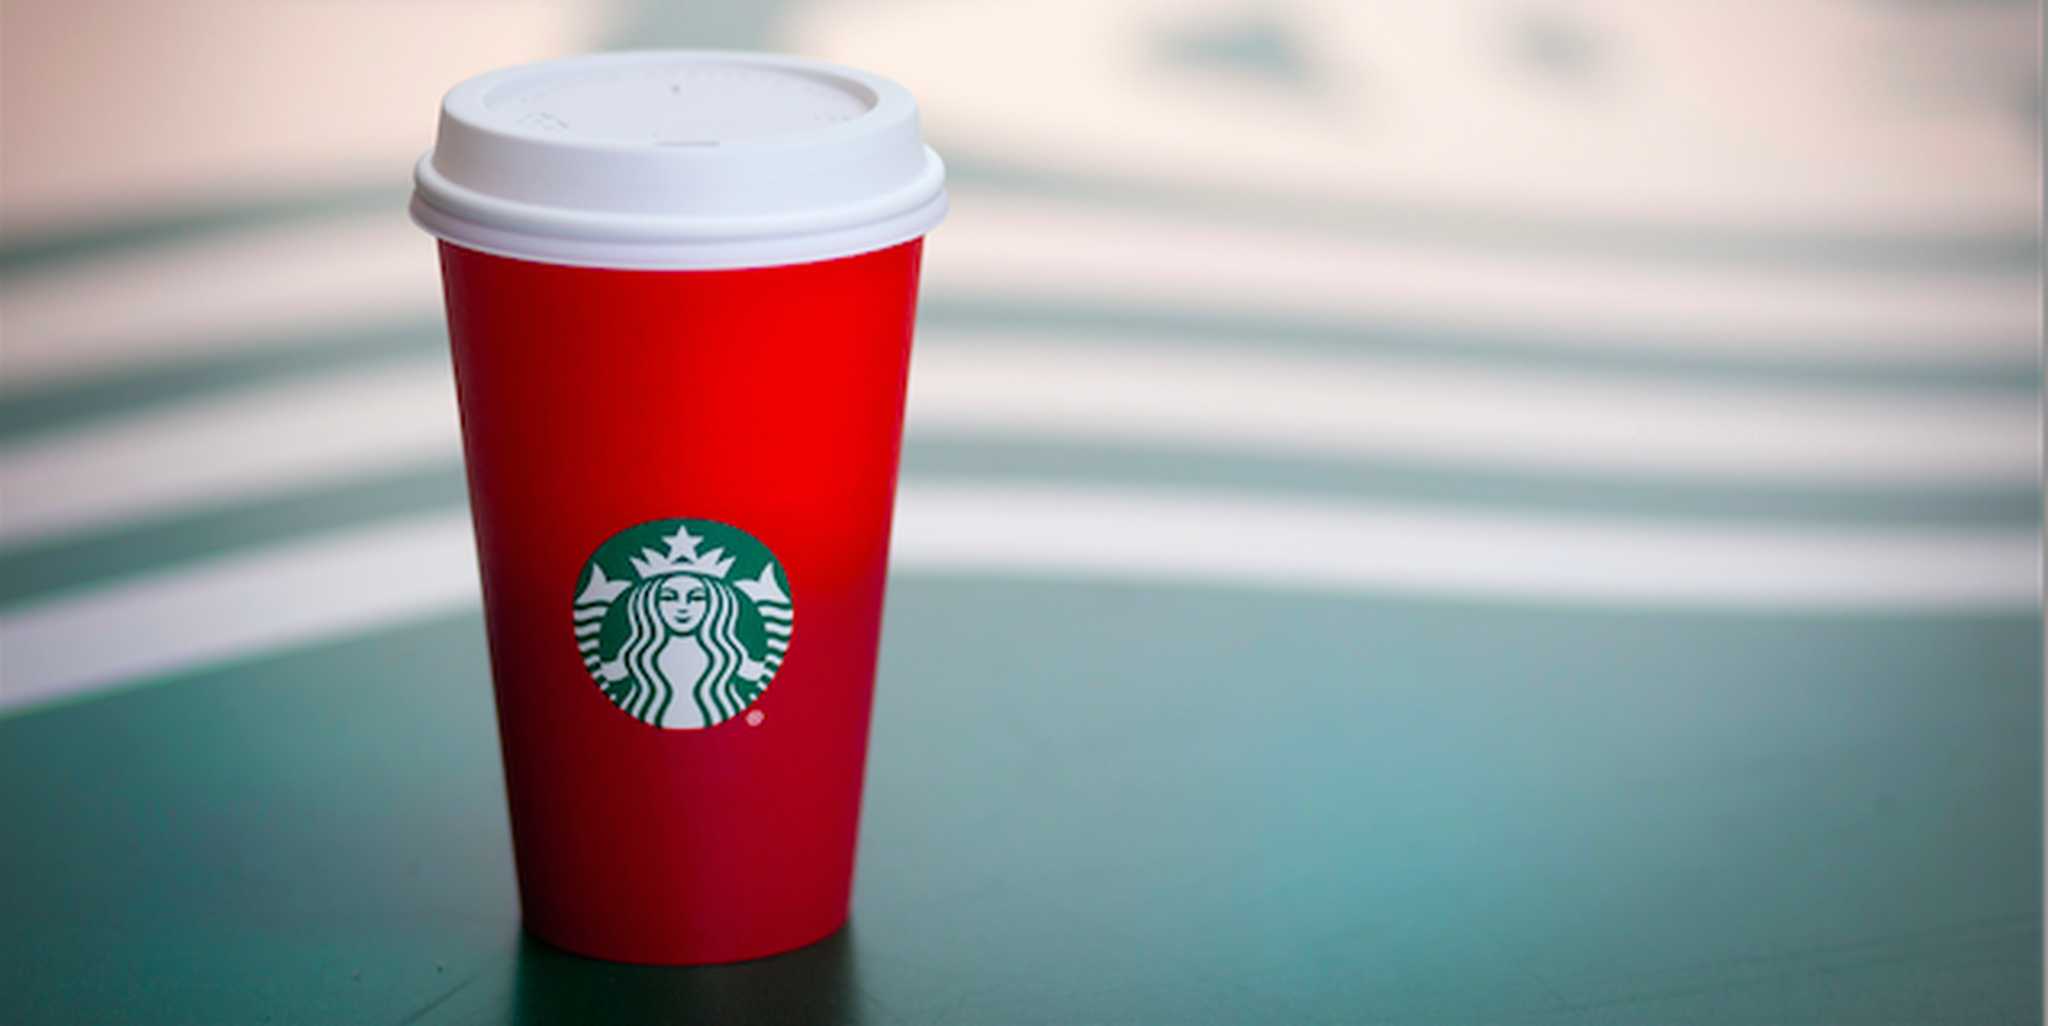 Here's proof no one was actually offended by Starbucks' holiday cups ...